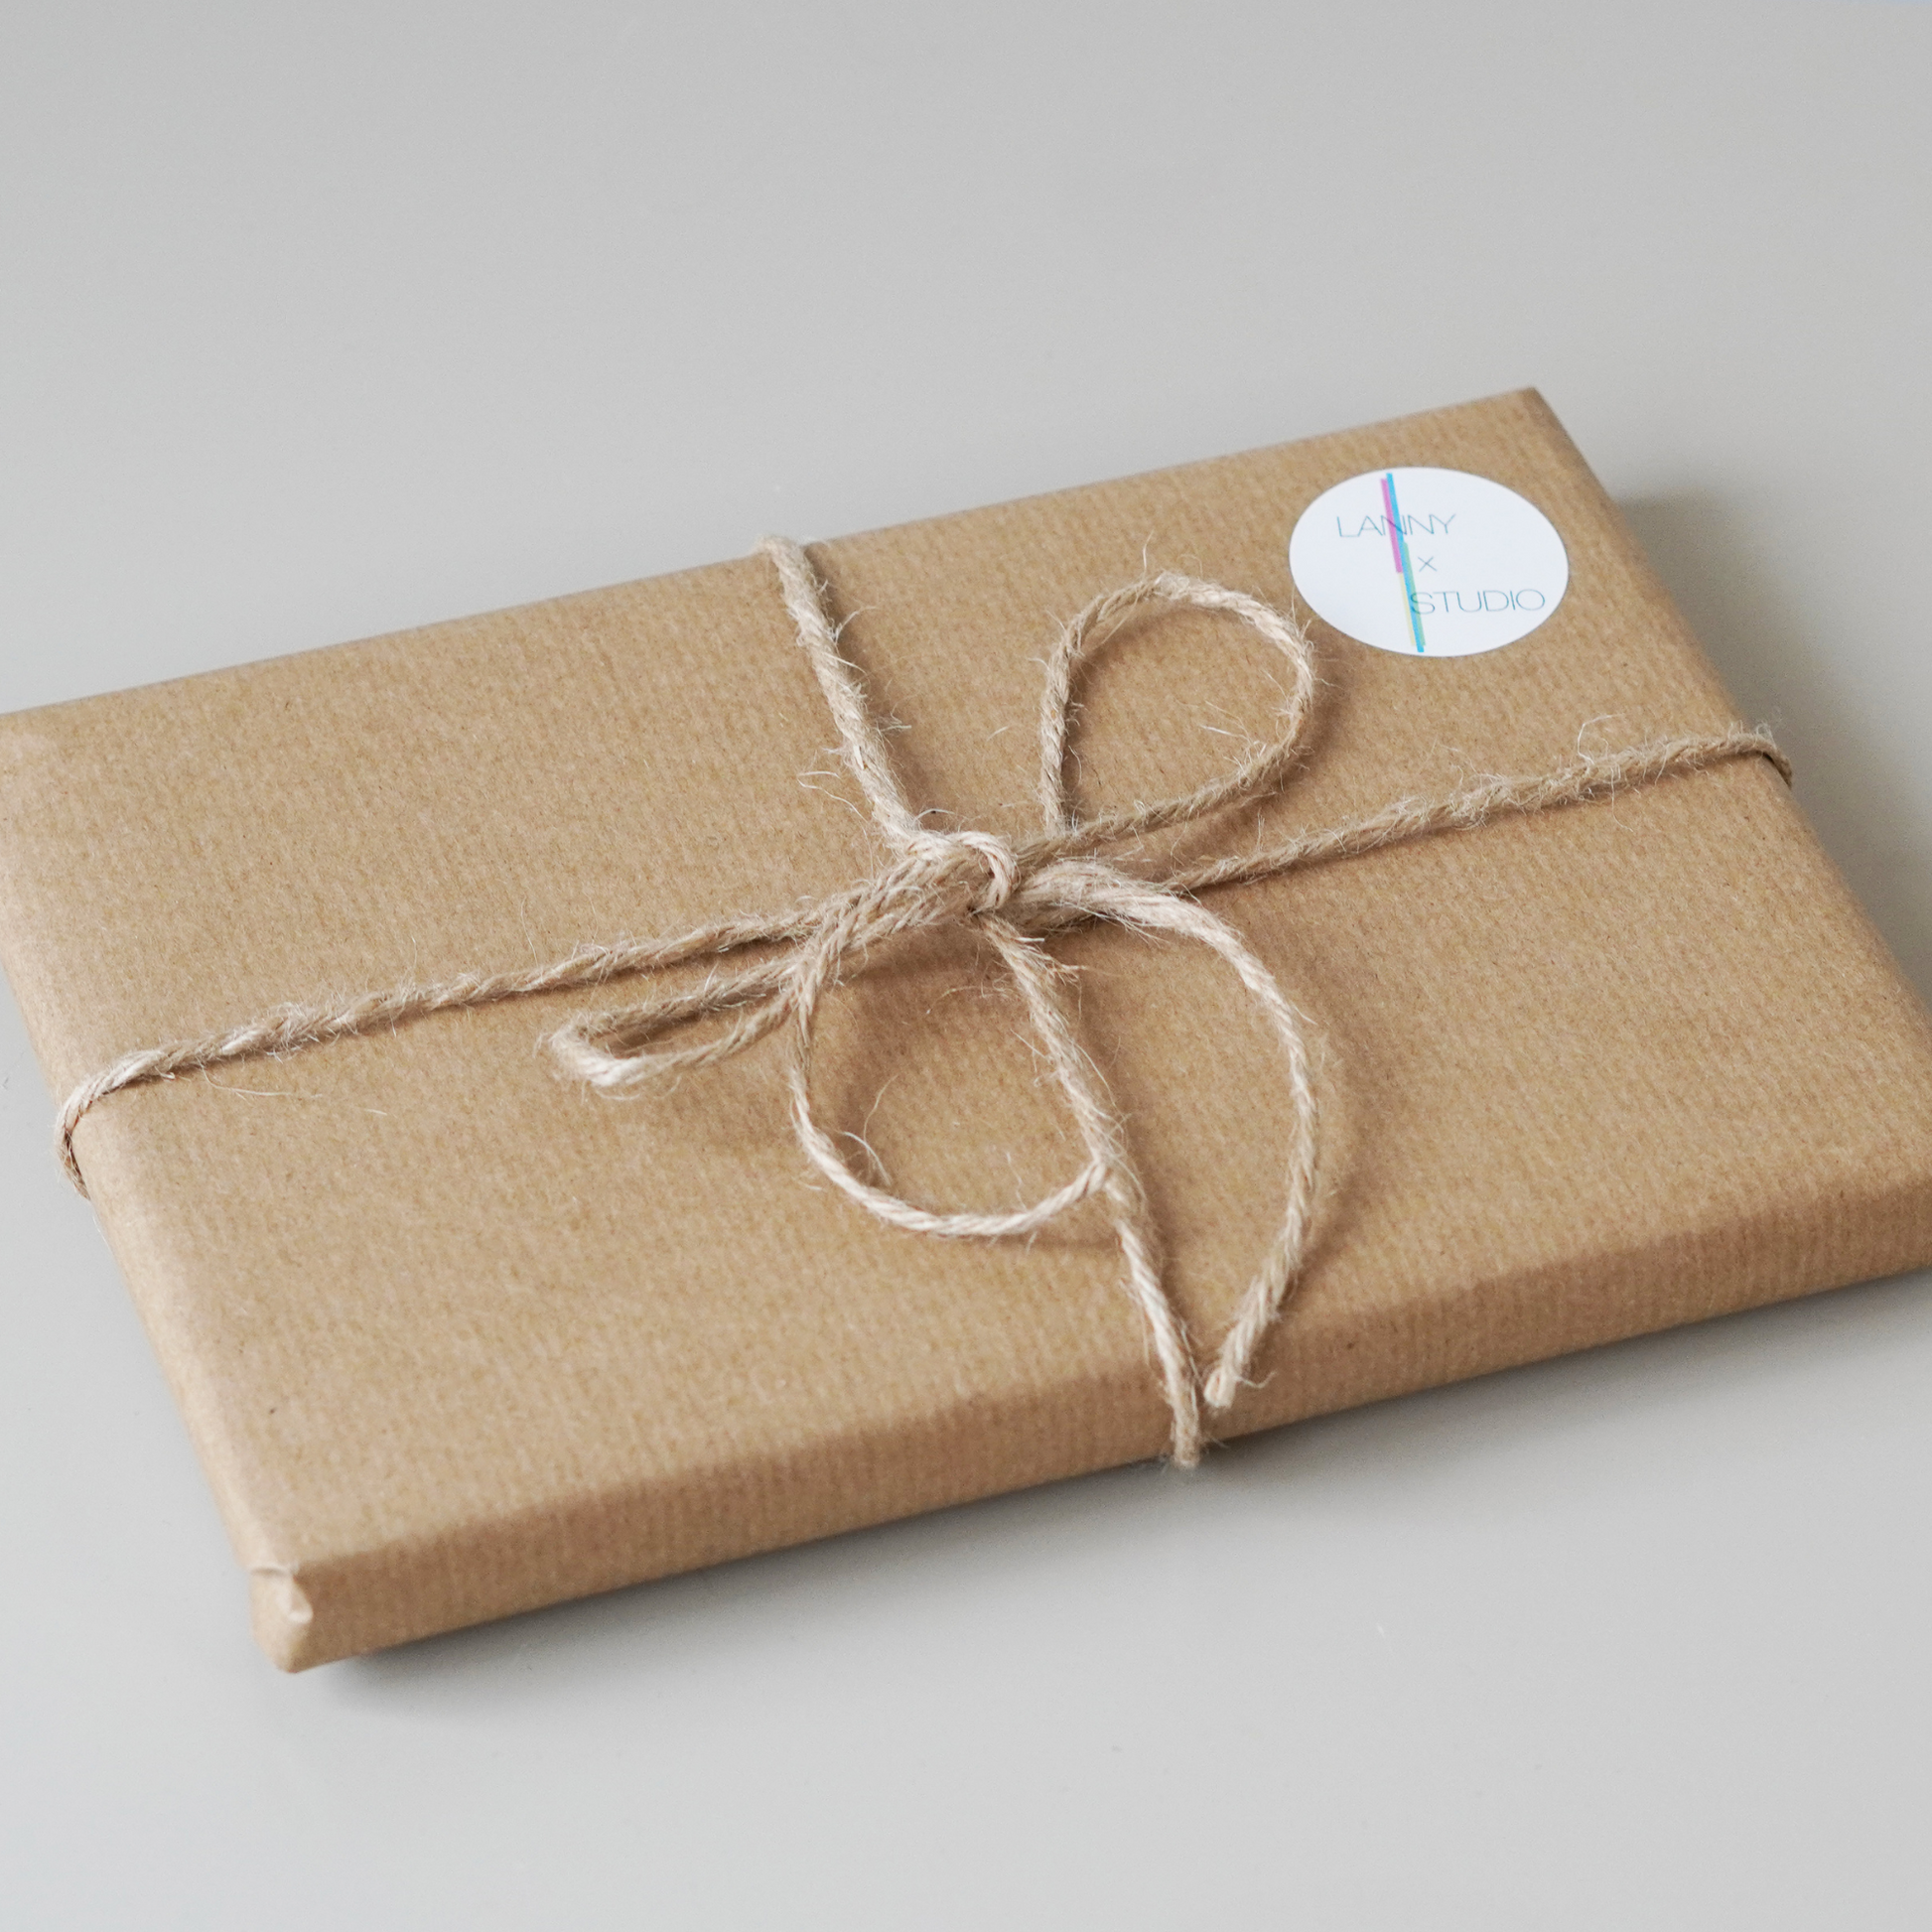 Gift wrapped box in eco packaging.